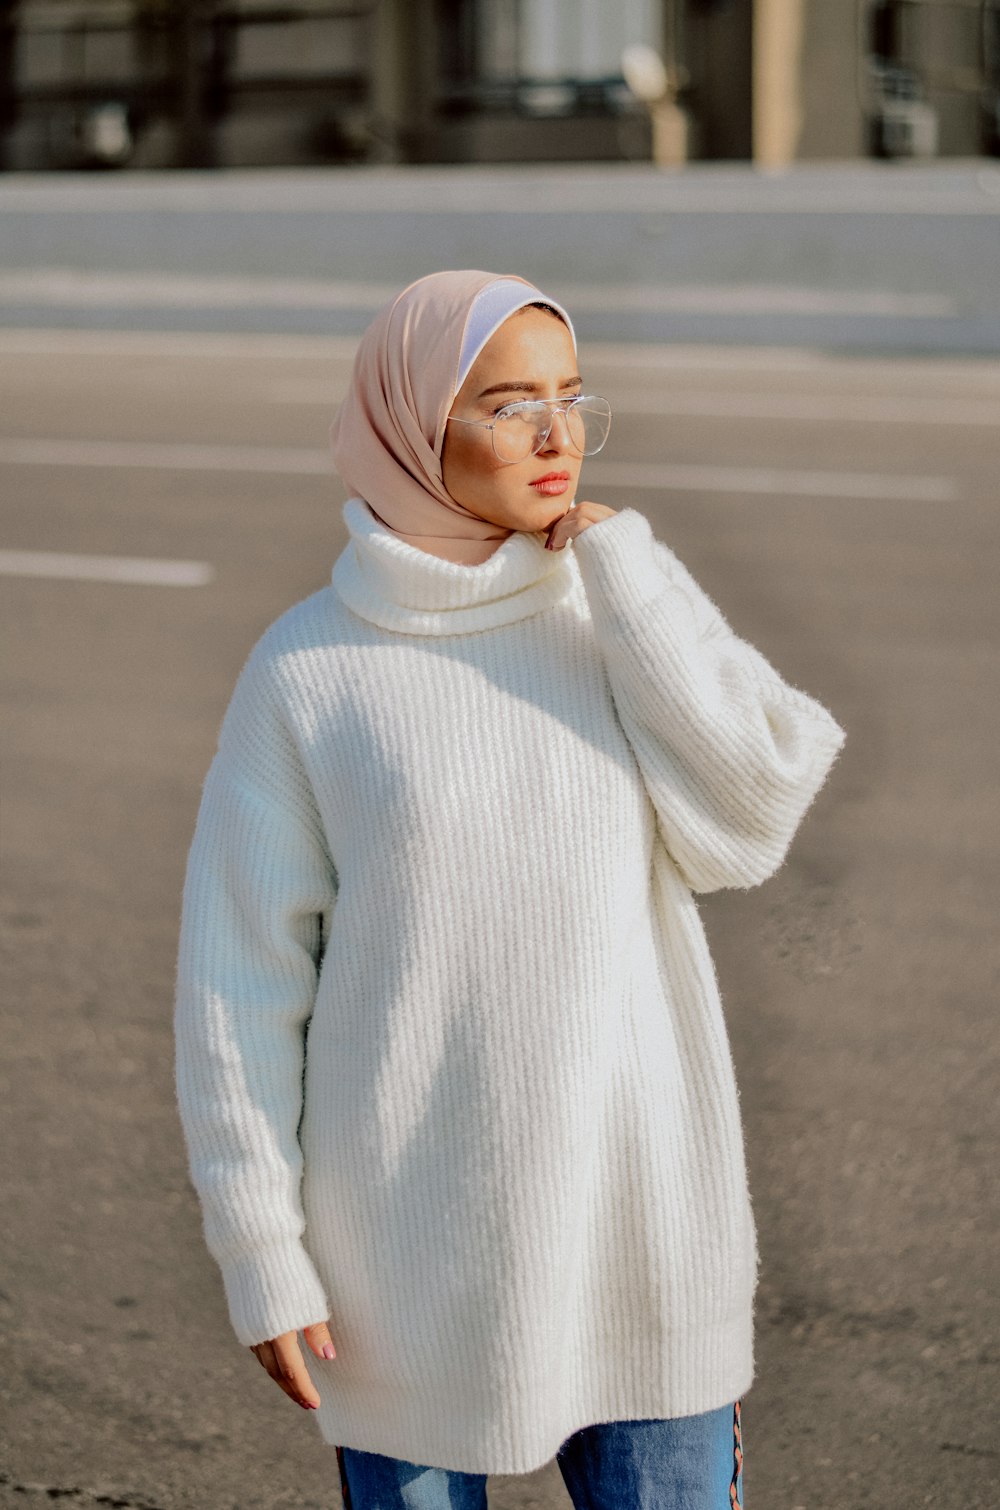 woman wearing white sweater, beige hijab headscarf, and eyeglasses standing on pathway during daytime